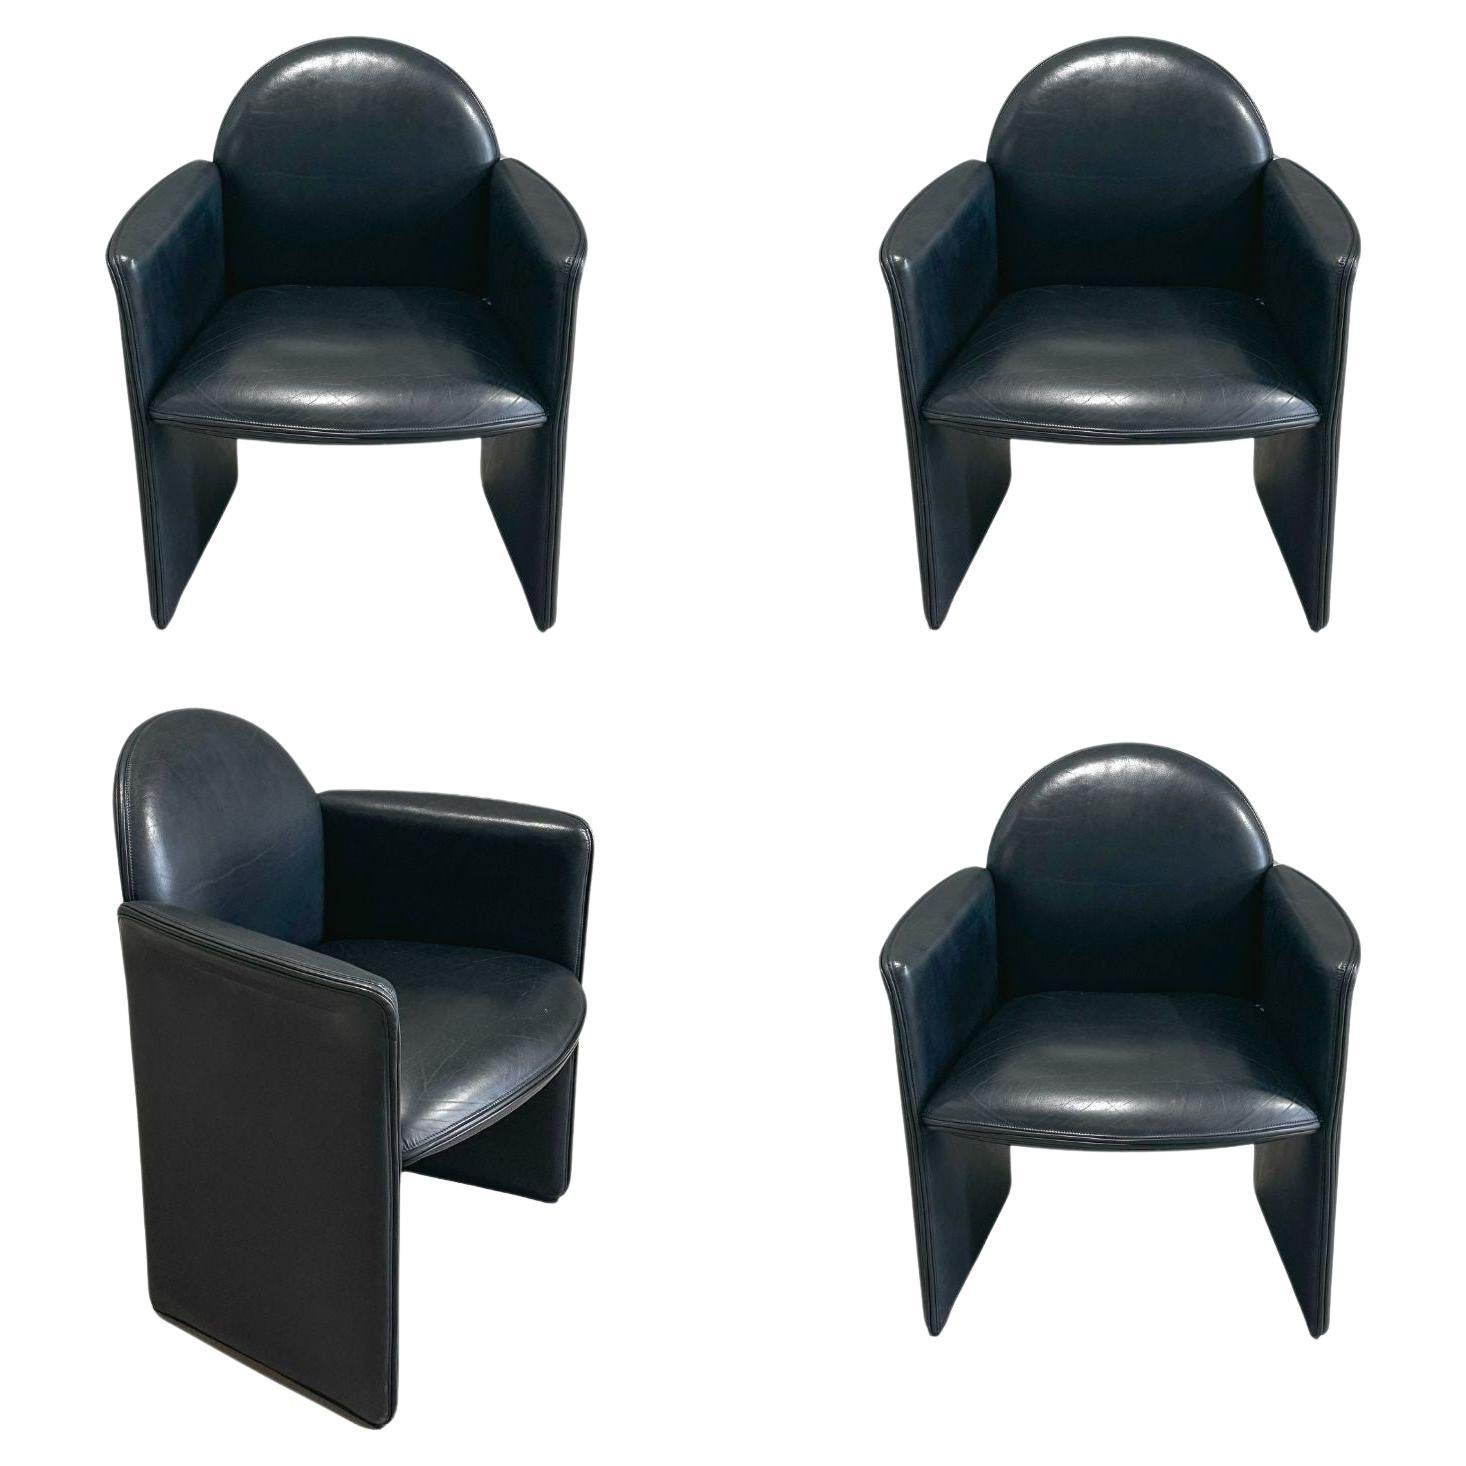 Set 4 Black Leather Italian Chairs, Italy 1980